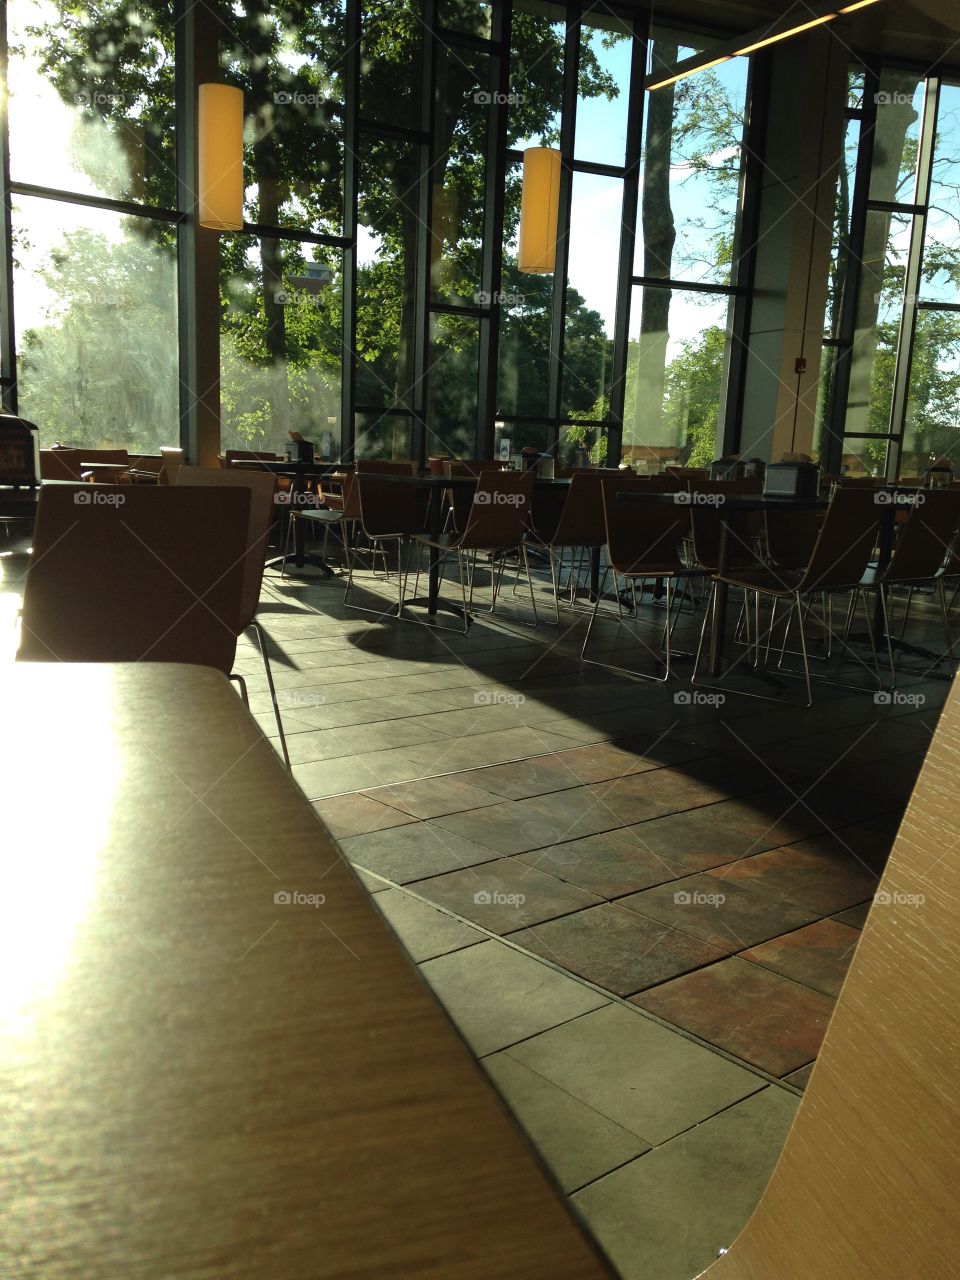 College dining hall seating area first thing in the morning 